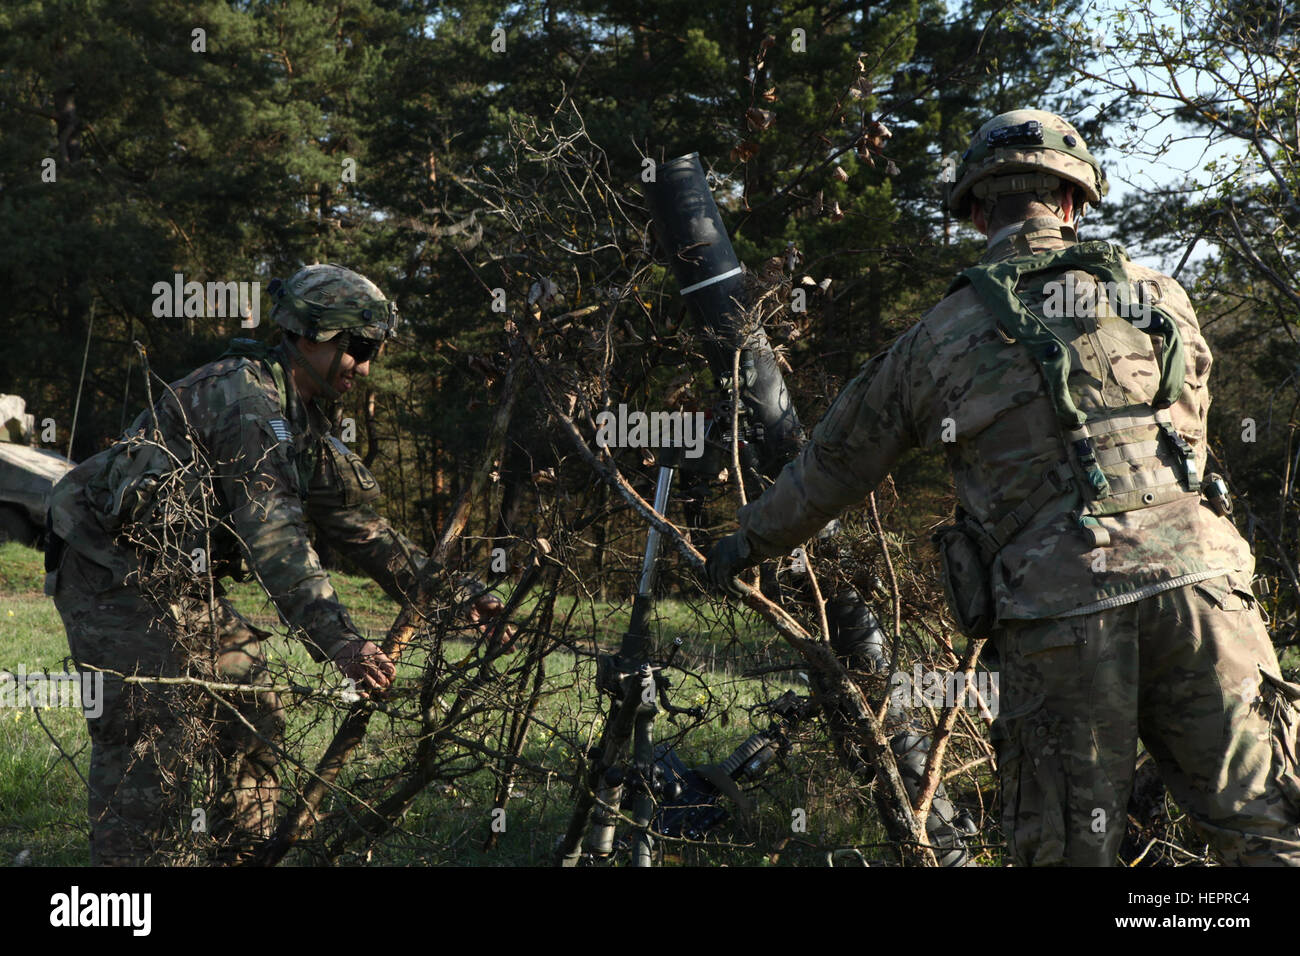 U.S. Soldiers of 1st Squadron, 91st Cavalry Regiment, 173rd Airborne Brigade camouflage a M120 mortar system while conducting defensive operations during exercise Saber Junction 16 at the U.S. Army’s Joint Multinational Readiness Center (JMRC) in Hohenfels, Germany, April 19, 2016. Saber Junction 16 is the U.S. Army Europe’s 173rd Airborne Brigade’s combat training center certification exercise, taking place at the JMRC in Hohenfels, Germany, Mar. 31-Apr. 24, 2016.  The exercise is designed to evaluate the readiness of the Army’s Europe-based combat brigades to conduct unified land operations  Stock Photo